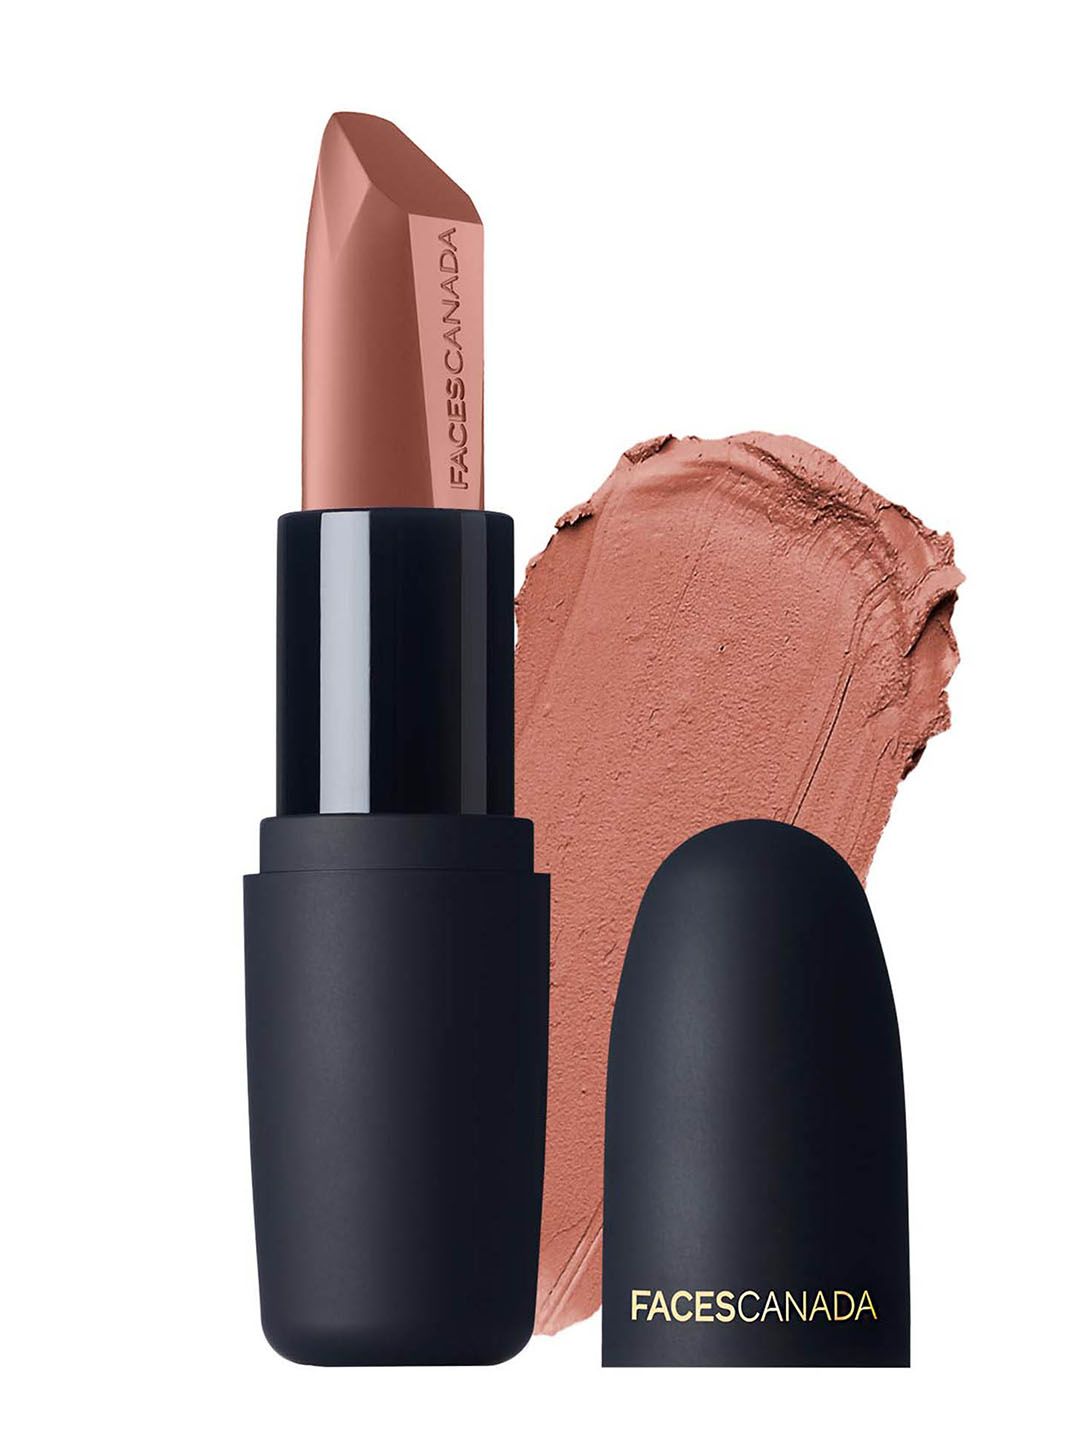 Faces Canada Weightless Matte Hydrating Lipstick with Almond Oil Buff Nude 4g Price in India